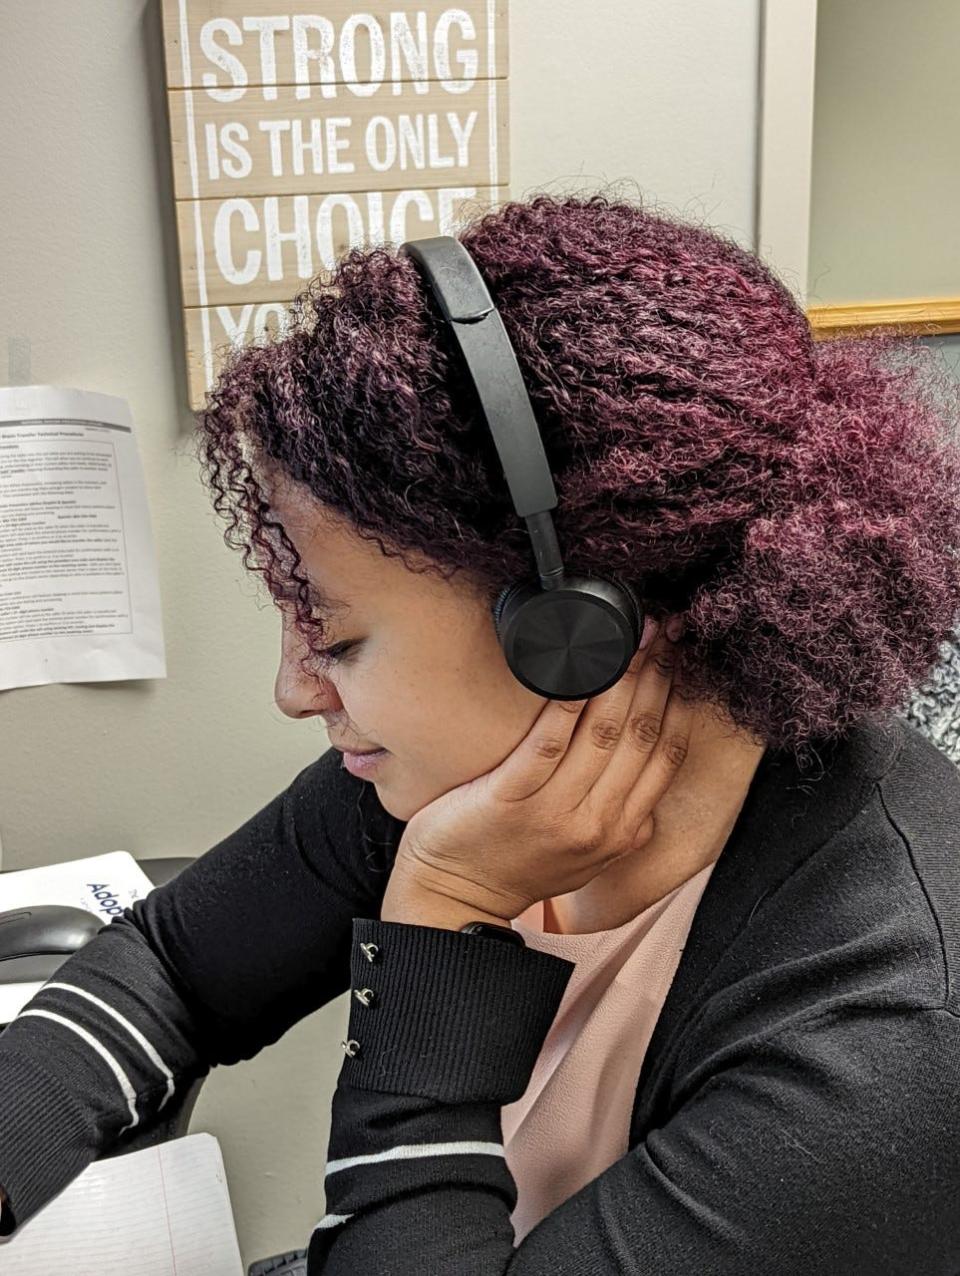 A trained counselor works at Wisconsin's only licensed National Suicide Prevention Lifeline call center in Green Bay.